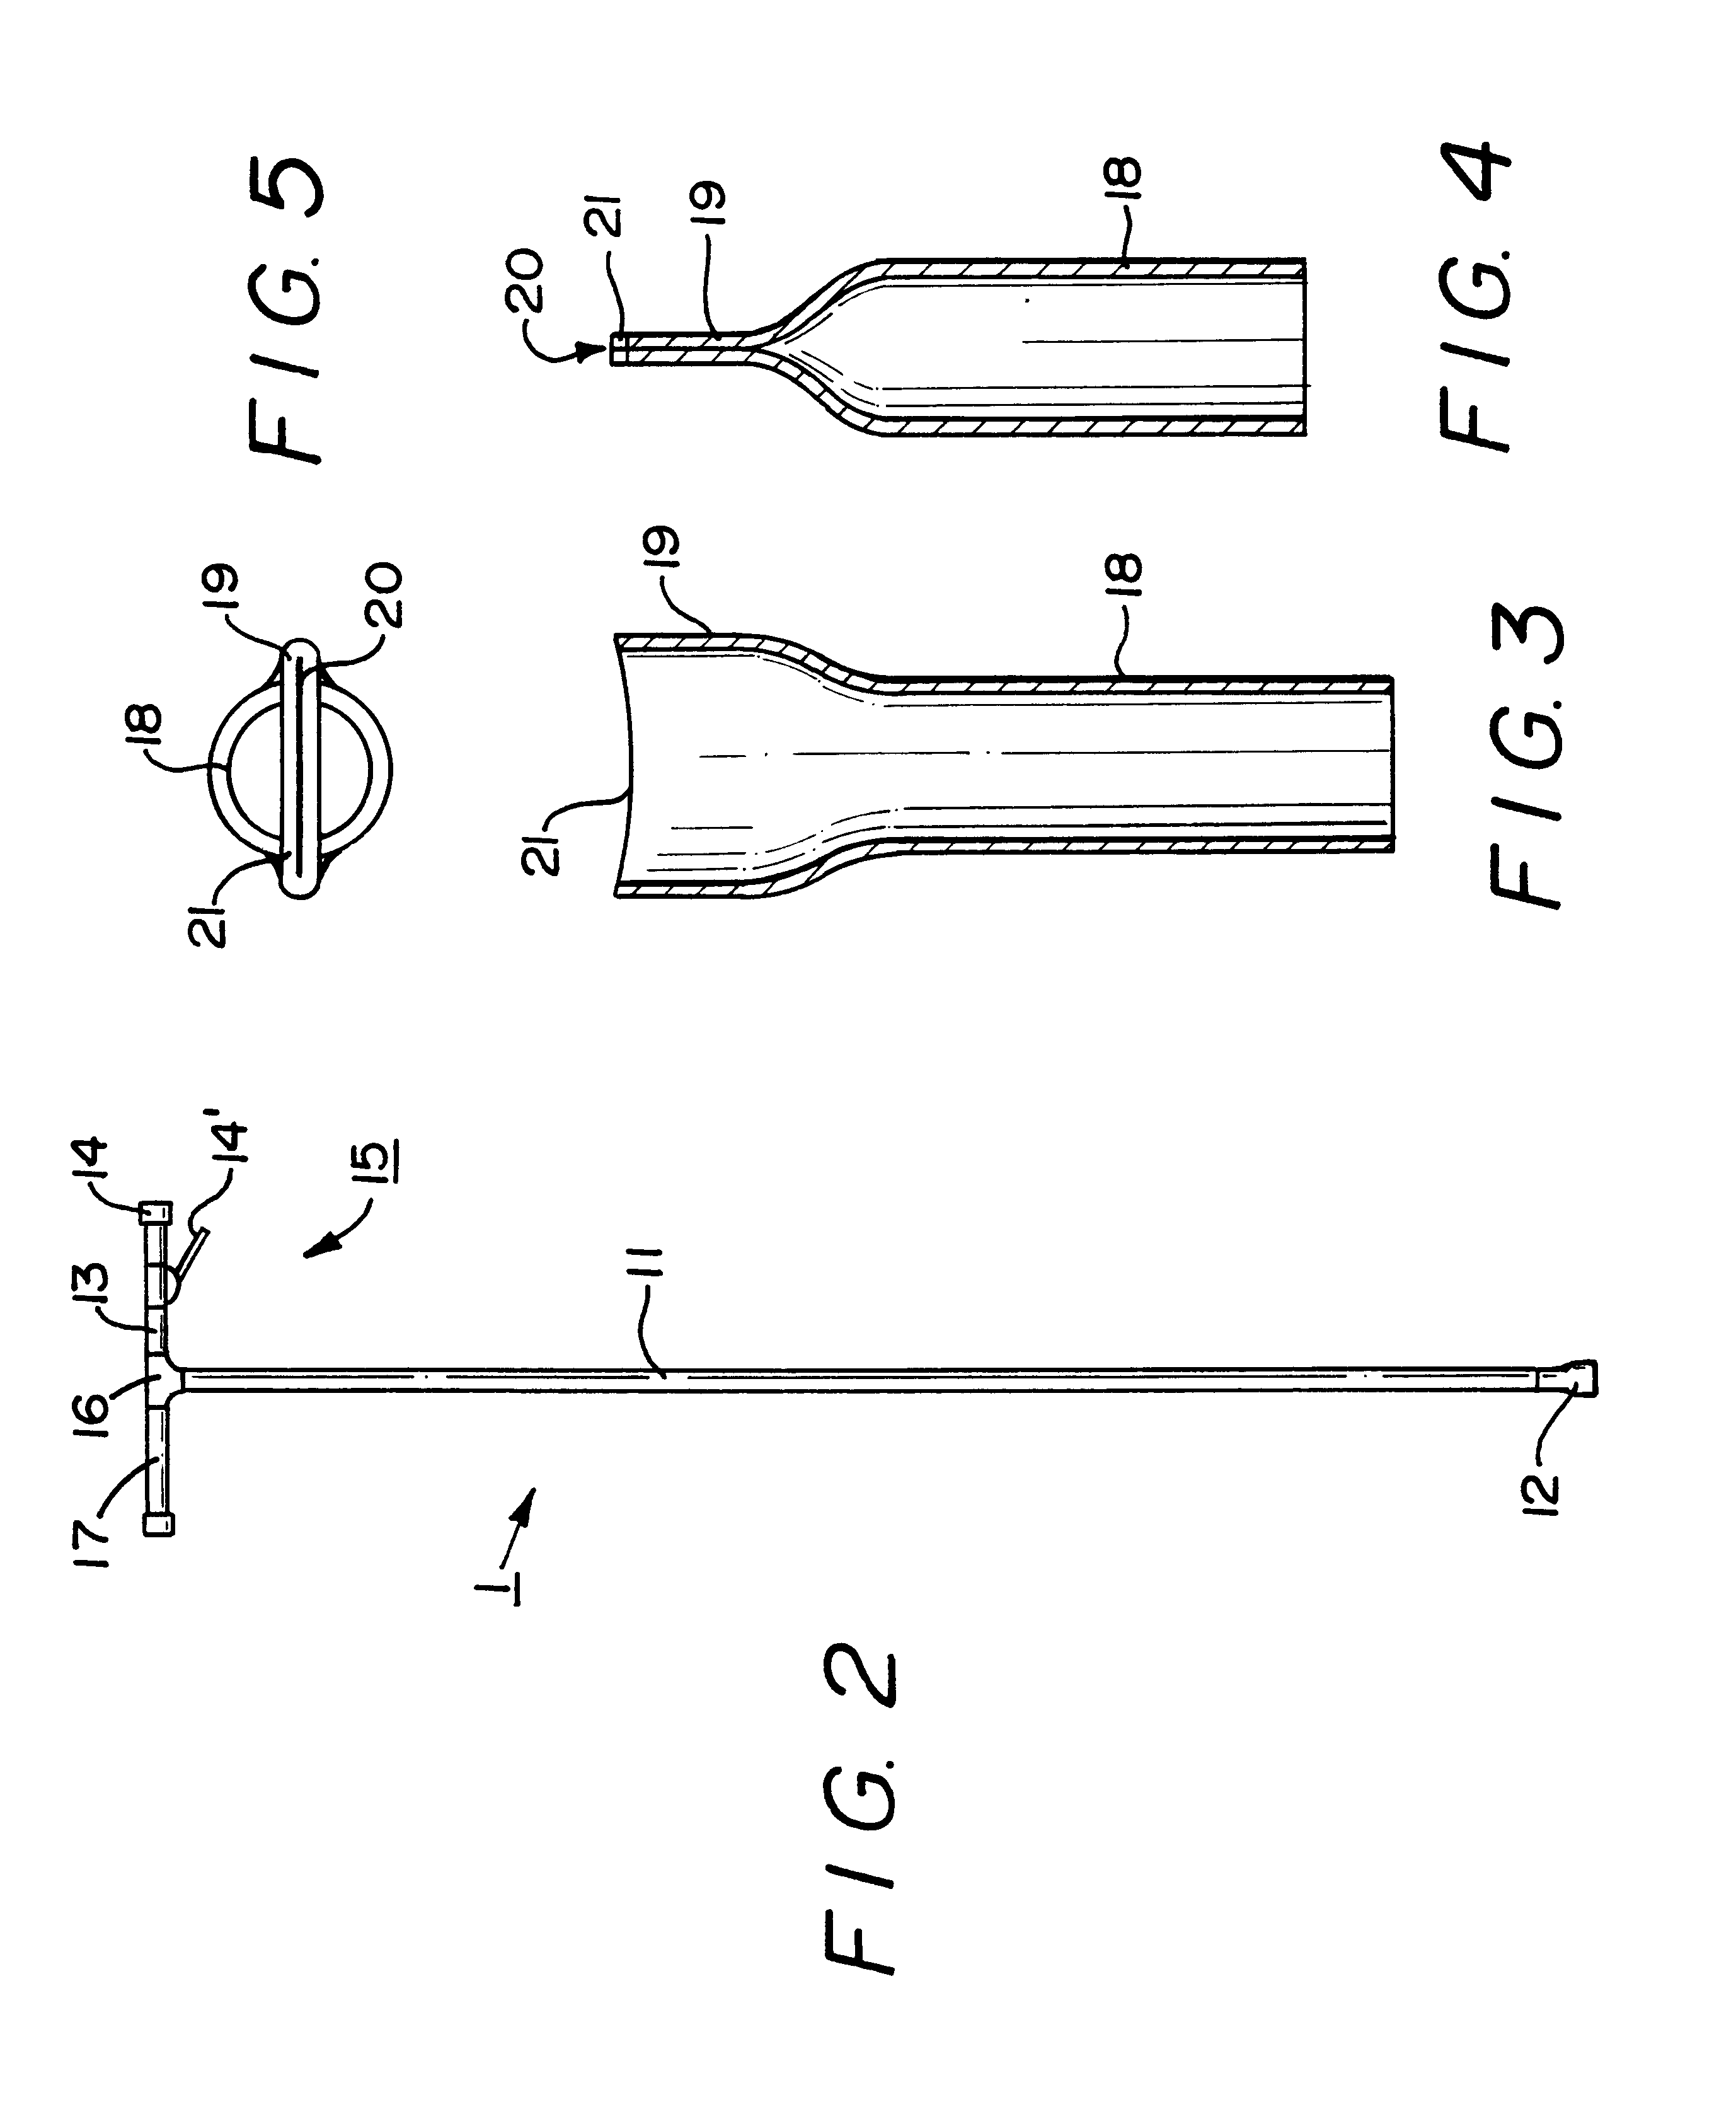 Vacuum excavation apparatus having an improved air lance, air lance nozzle, and vacuum system including a multistage venturi ejector